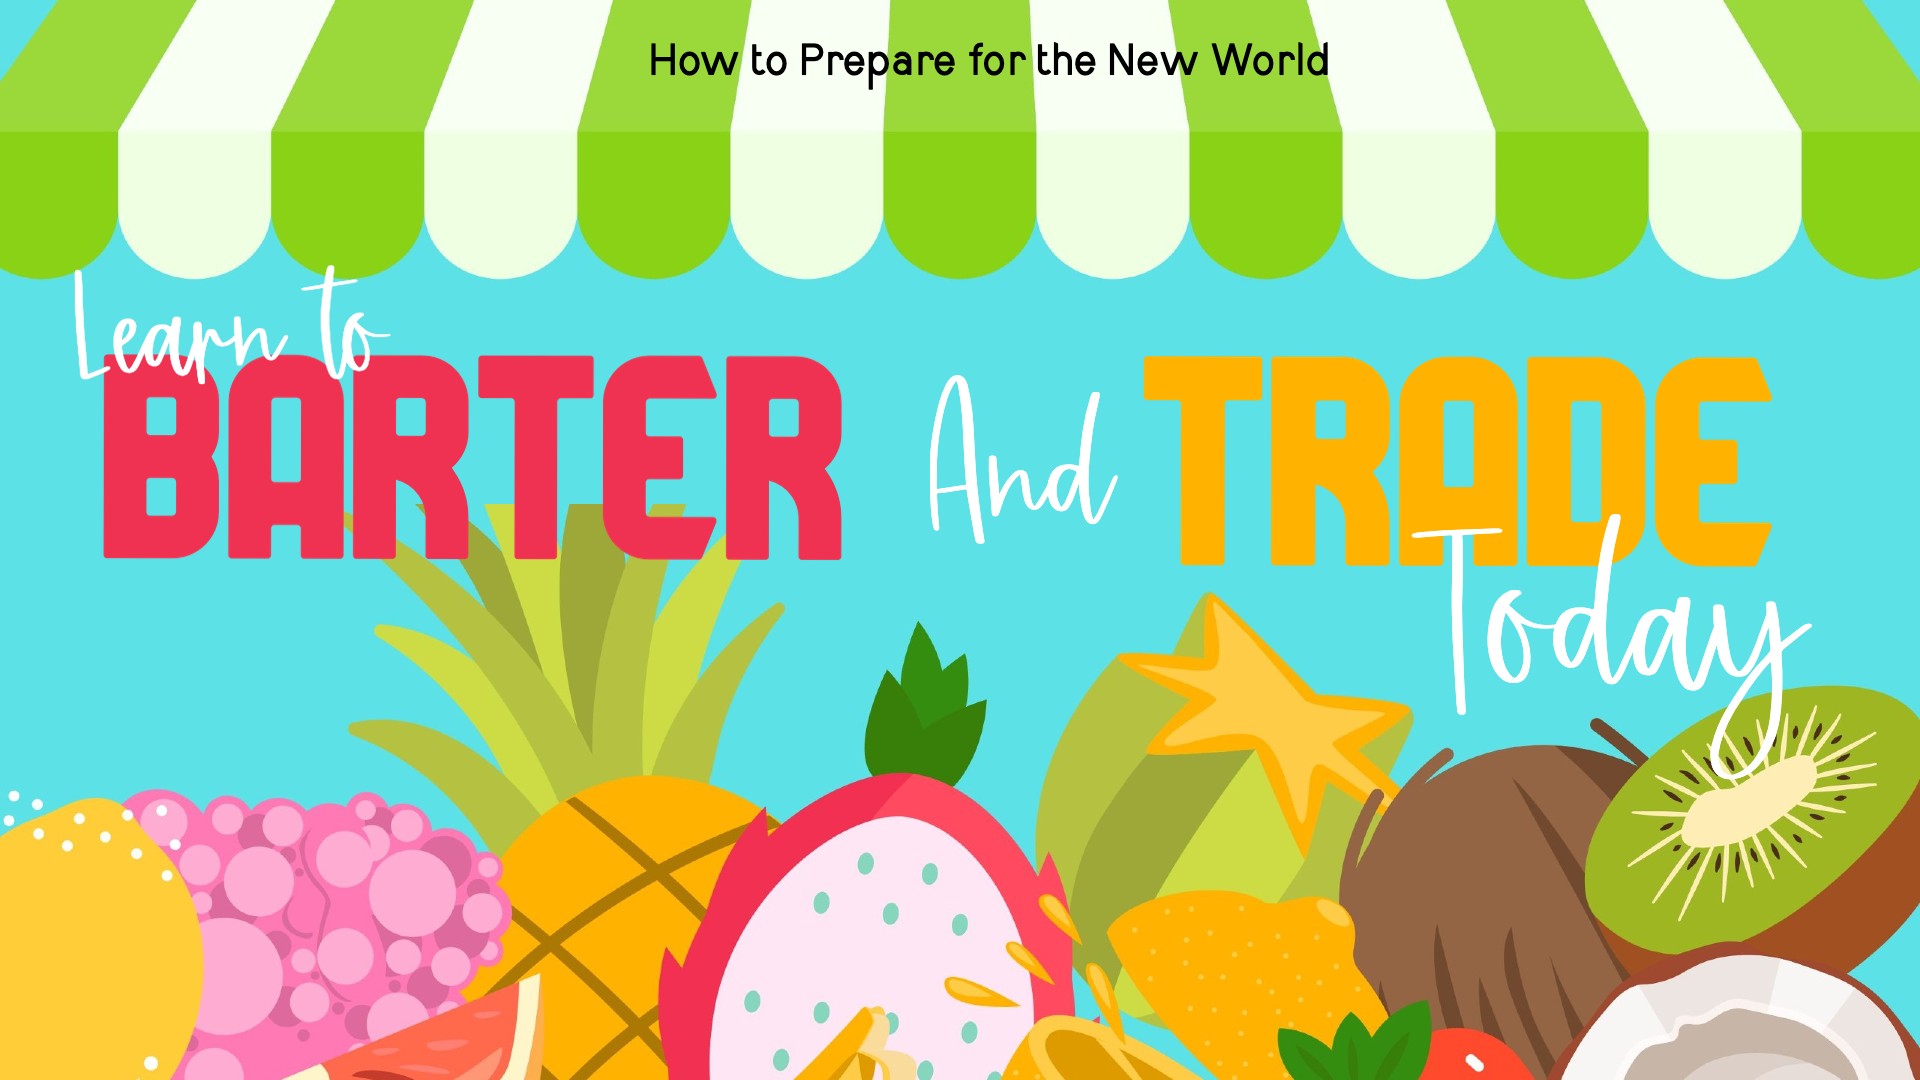 Learn to Barter and Trade Today: How to Prepare for the New World